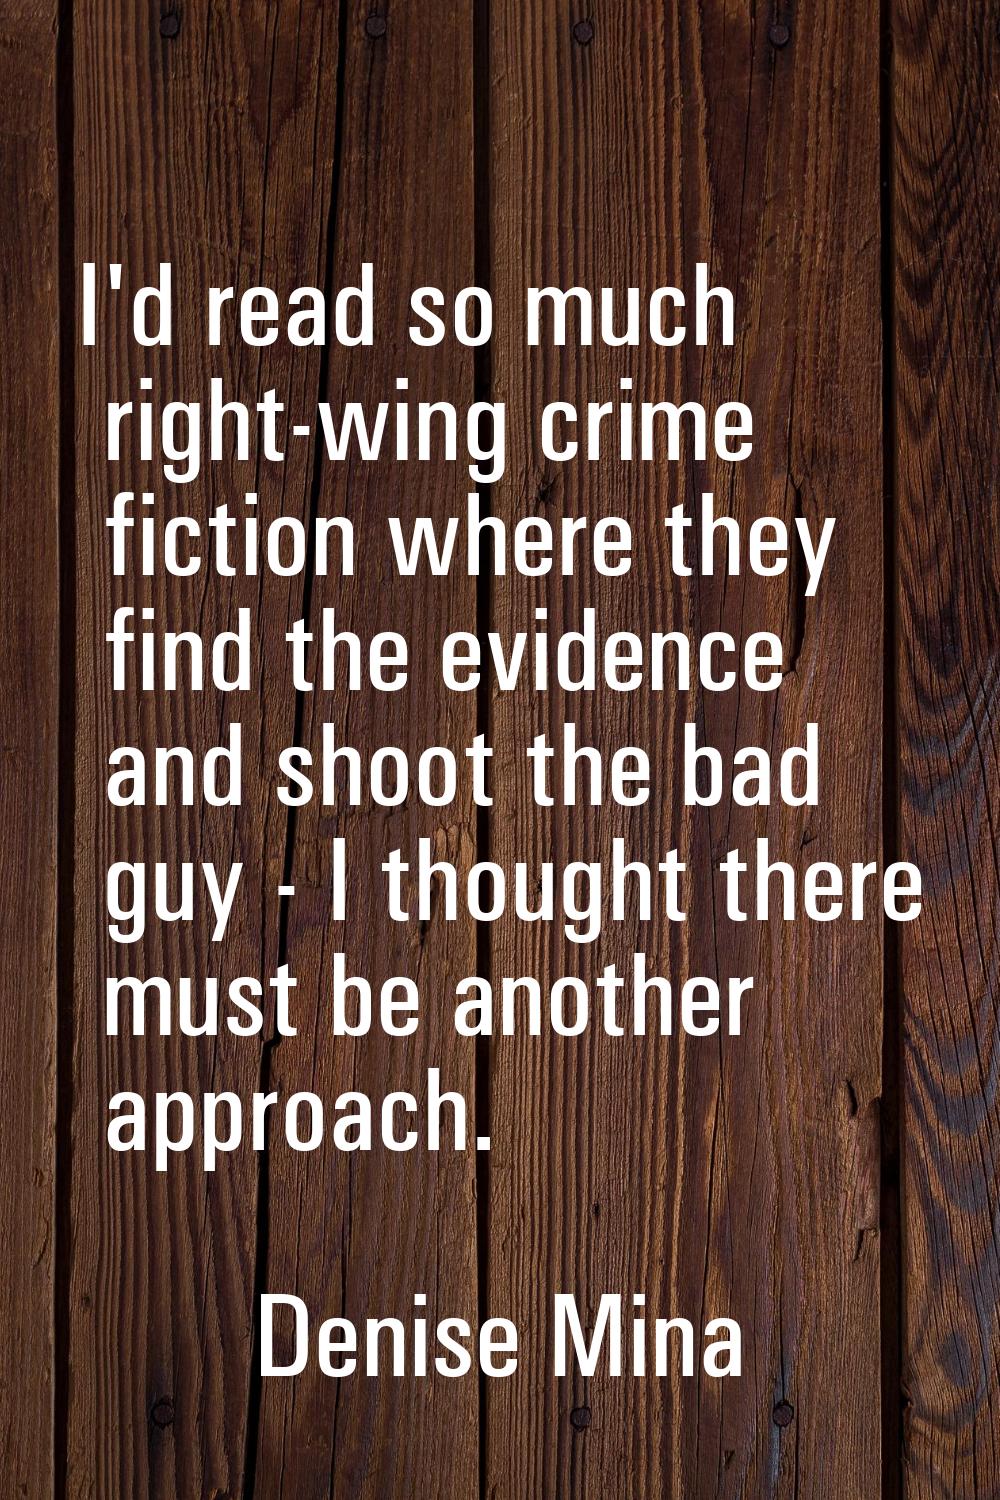 I'd read so much right-wing crime fiction where they find the evidence and shoot the bad guy - I th